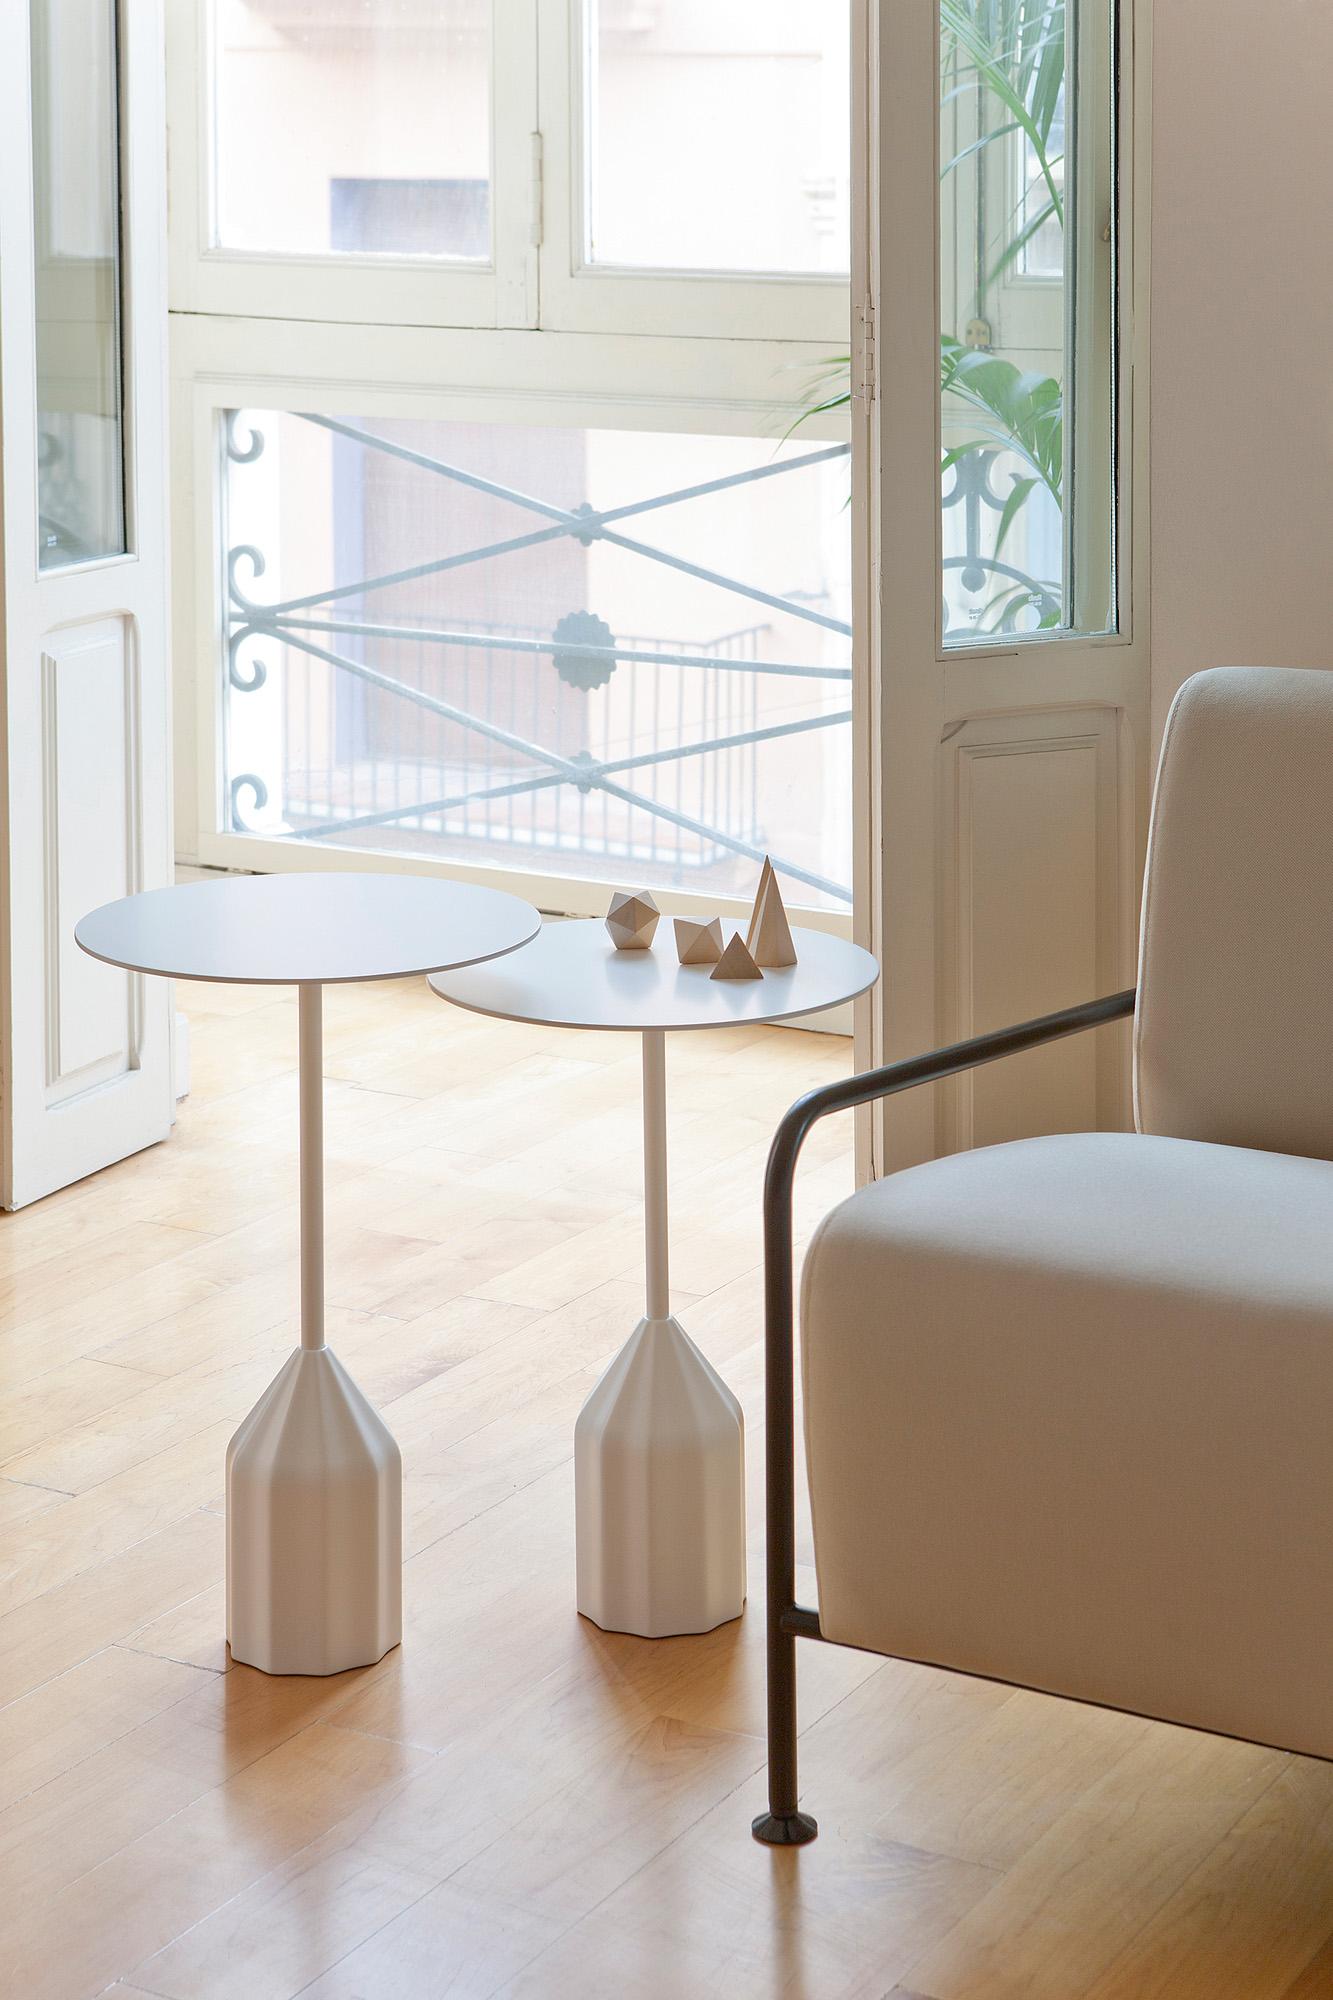 The little brother of the popular Burin dining table by Patricia Urquiola.

This sculptural side table is available in black and white designed by Patricia Urquiola for Viccarbe. 

Its strong personality makes it a very dynamic piece being perfect